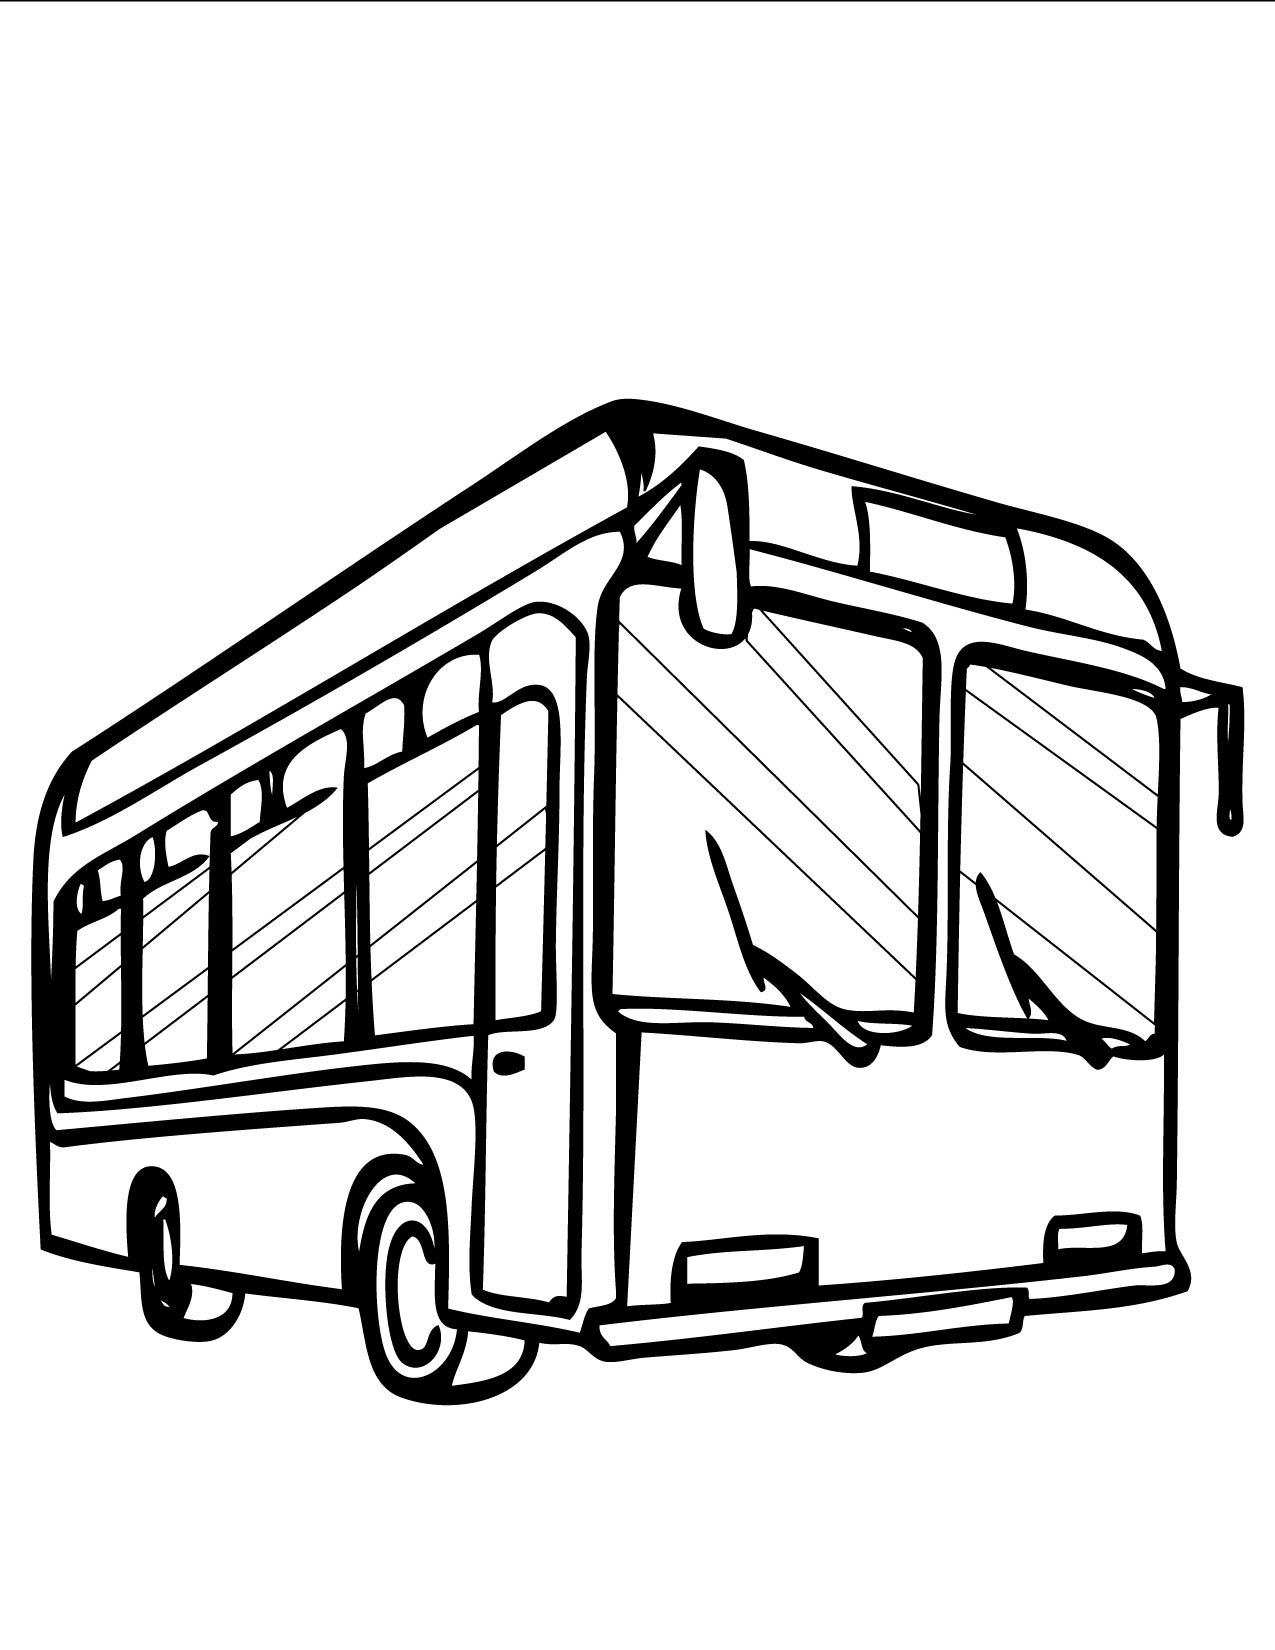 City Bus Coloring Page at Free printable colorings